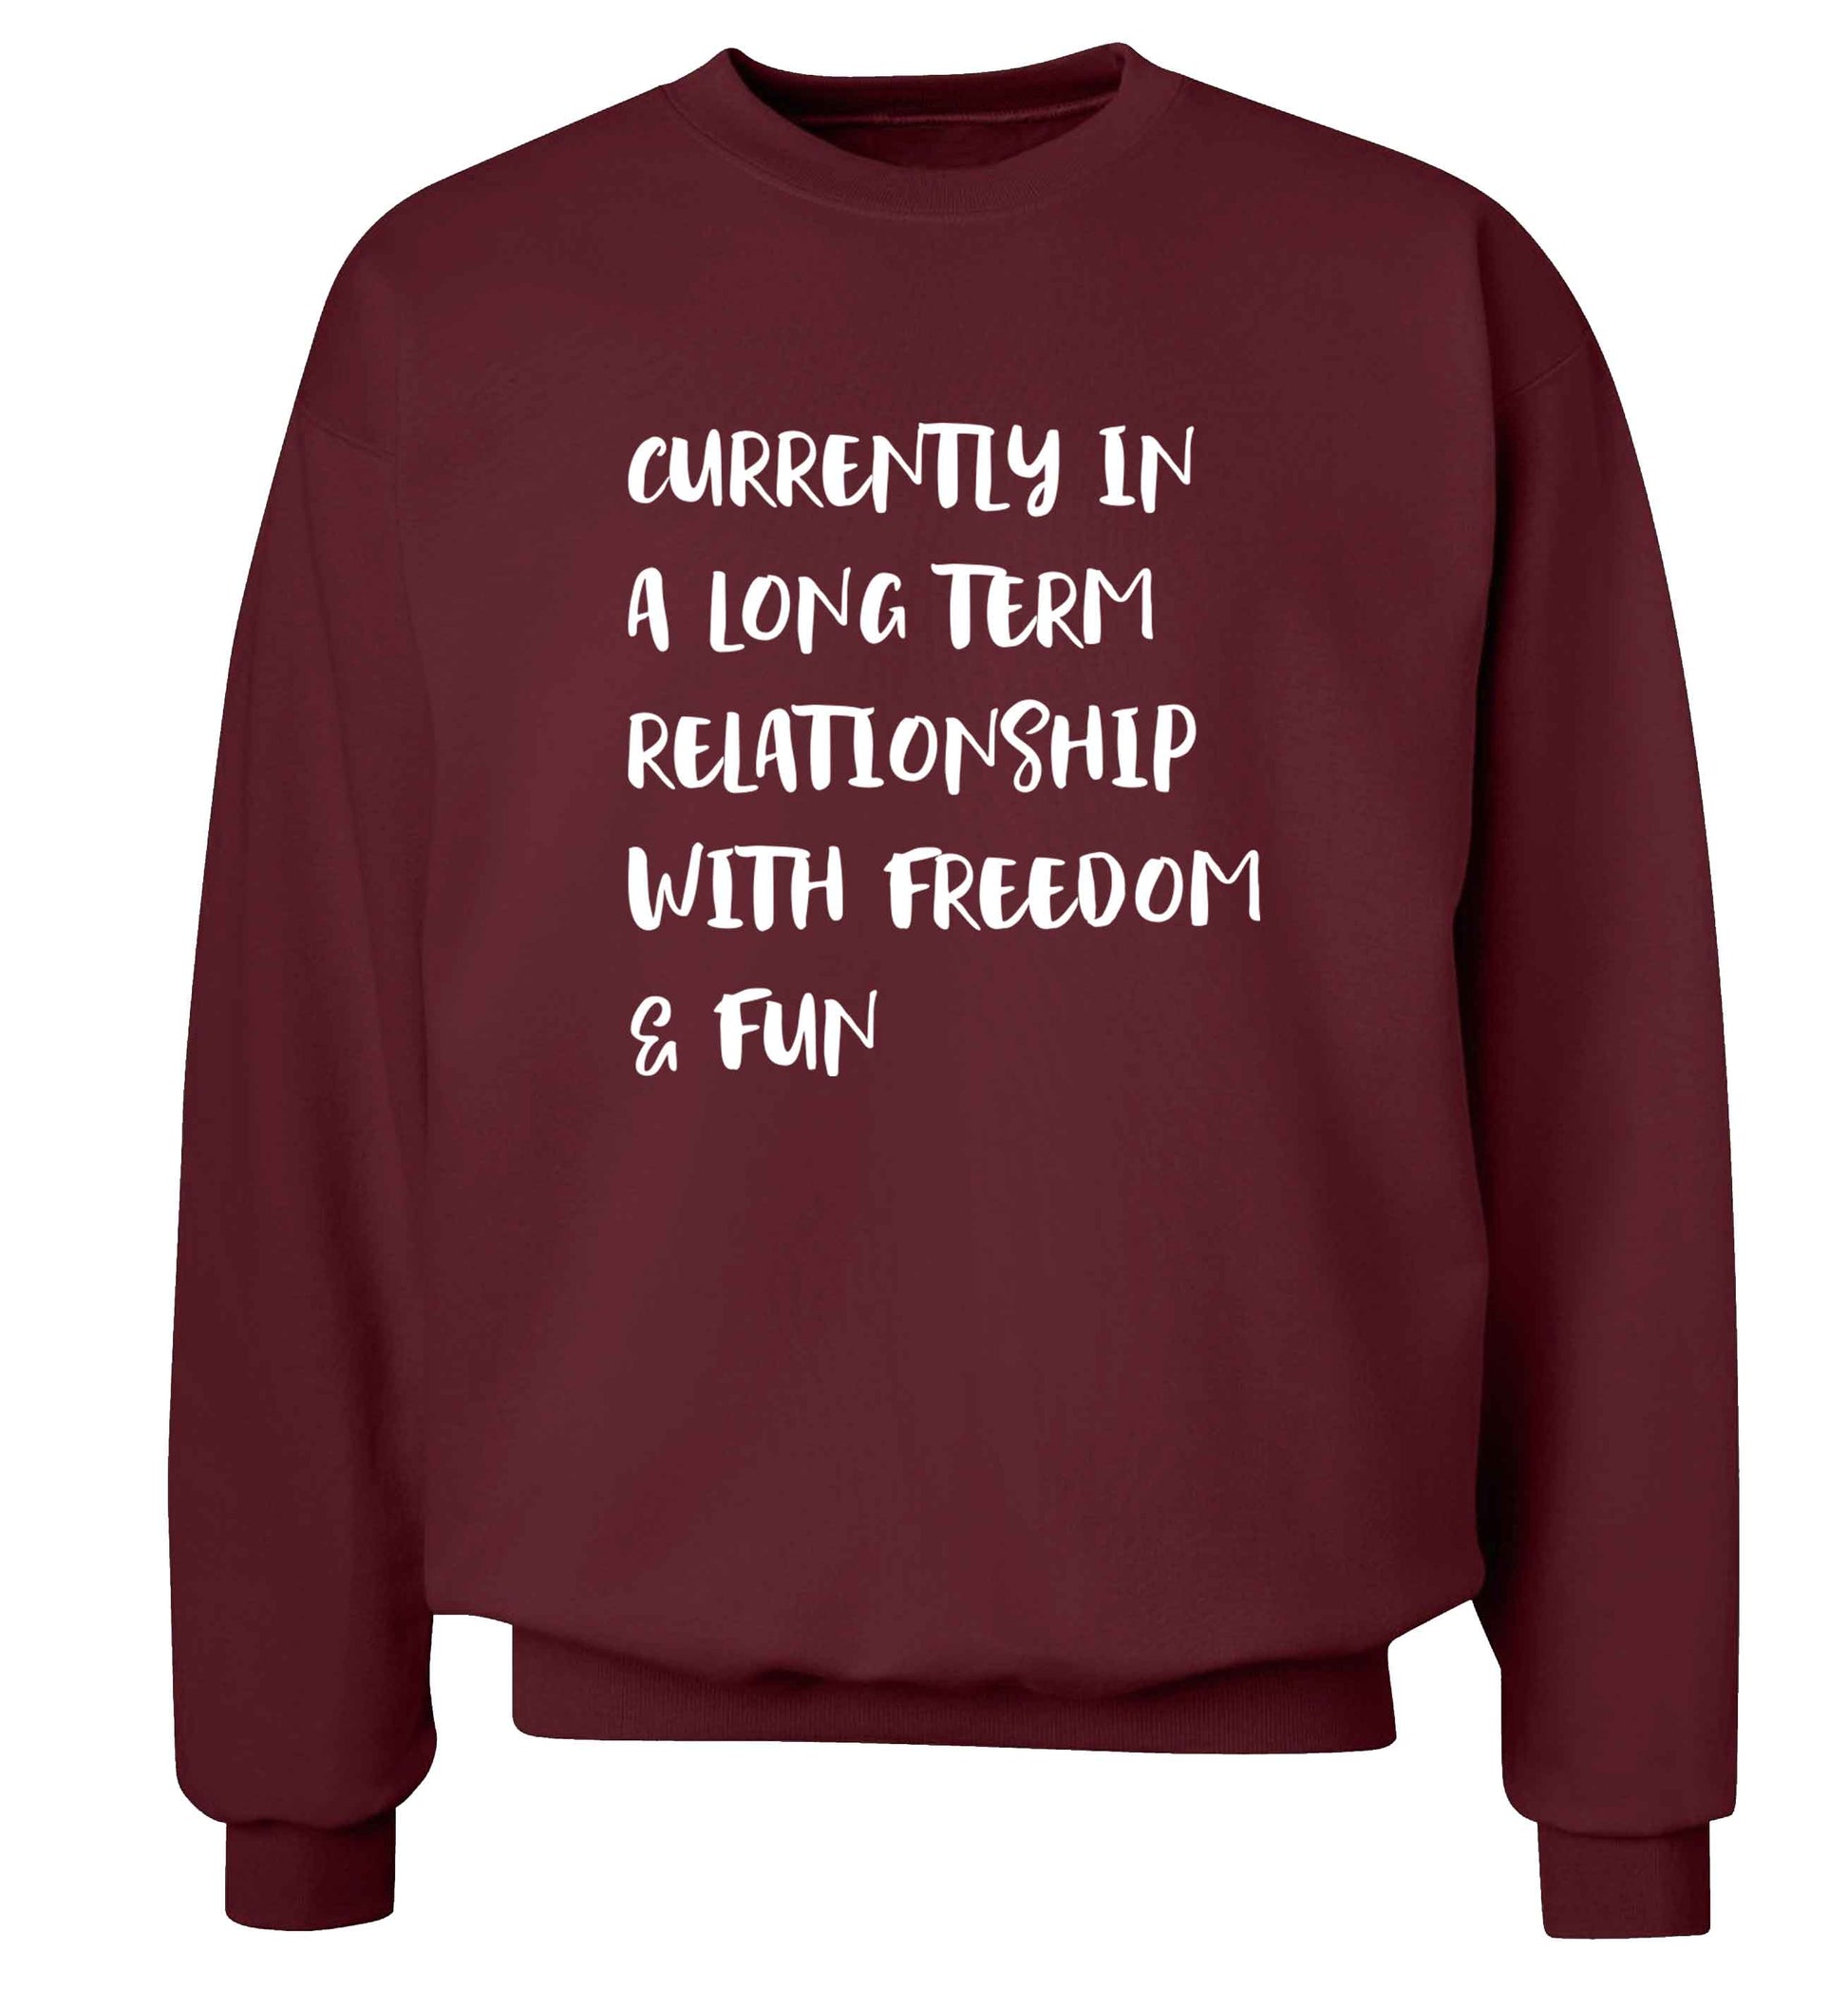 Currently in a long term relationship with freedom and fun adult's unisex maroon sweater 2XL